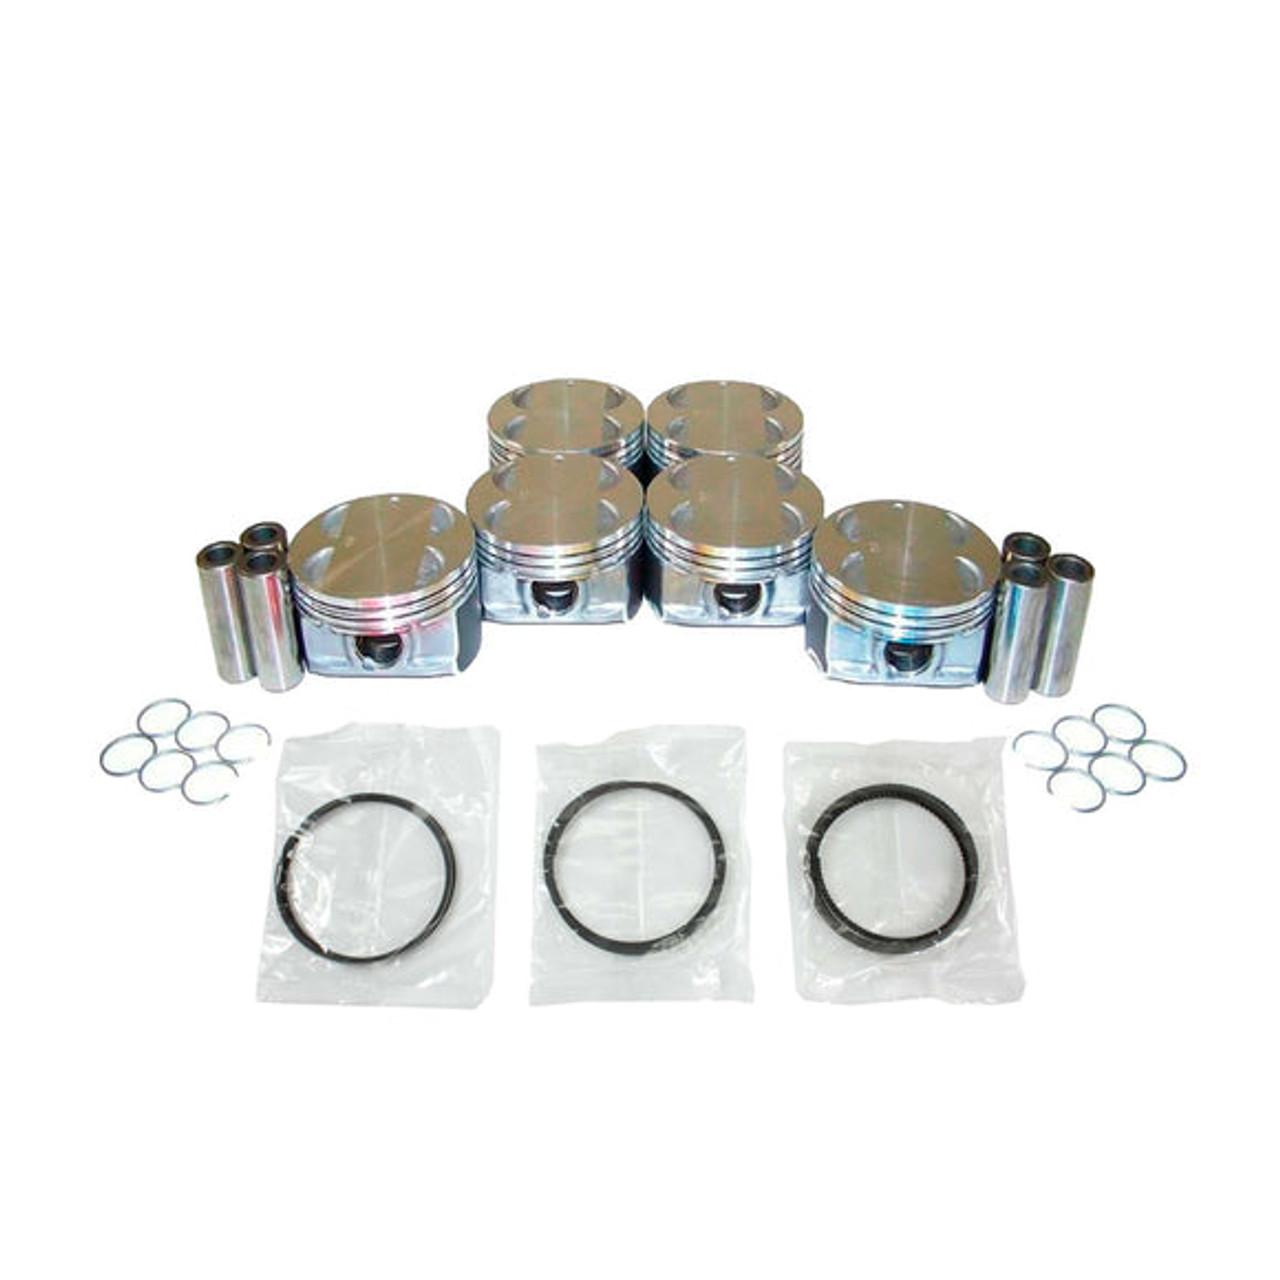 Piston Set with Rings - 2005 Buick Rendezvous 3.6L Engine Parts # PRK3136ZE13